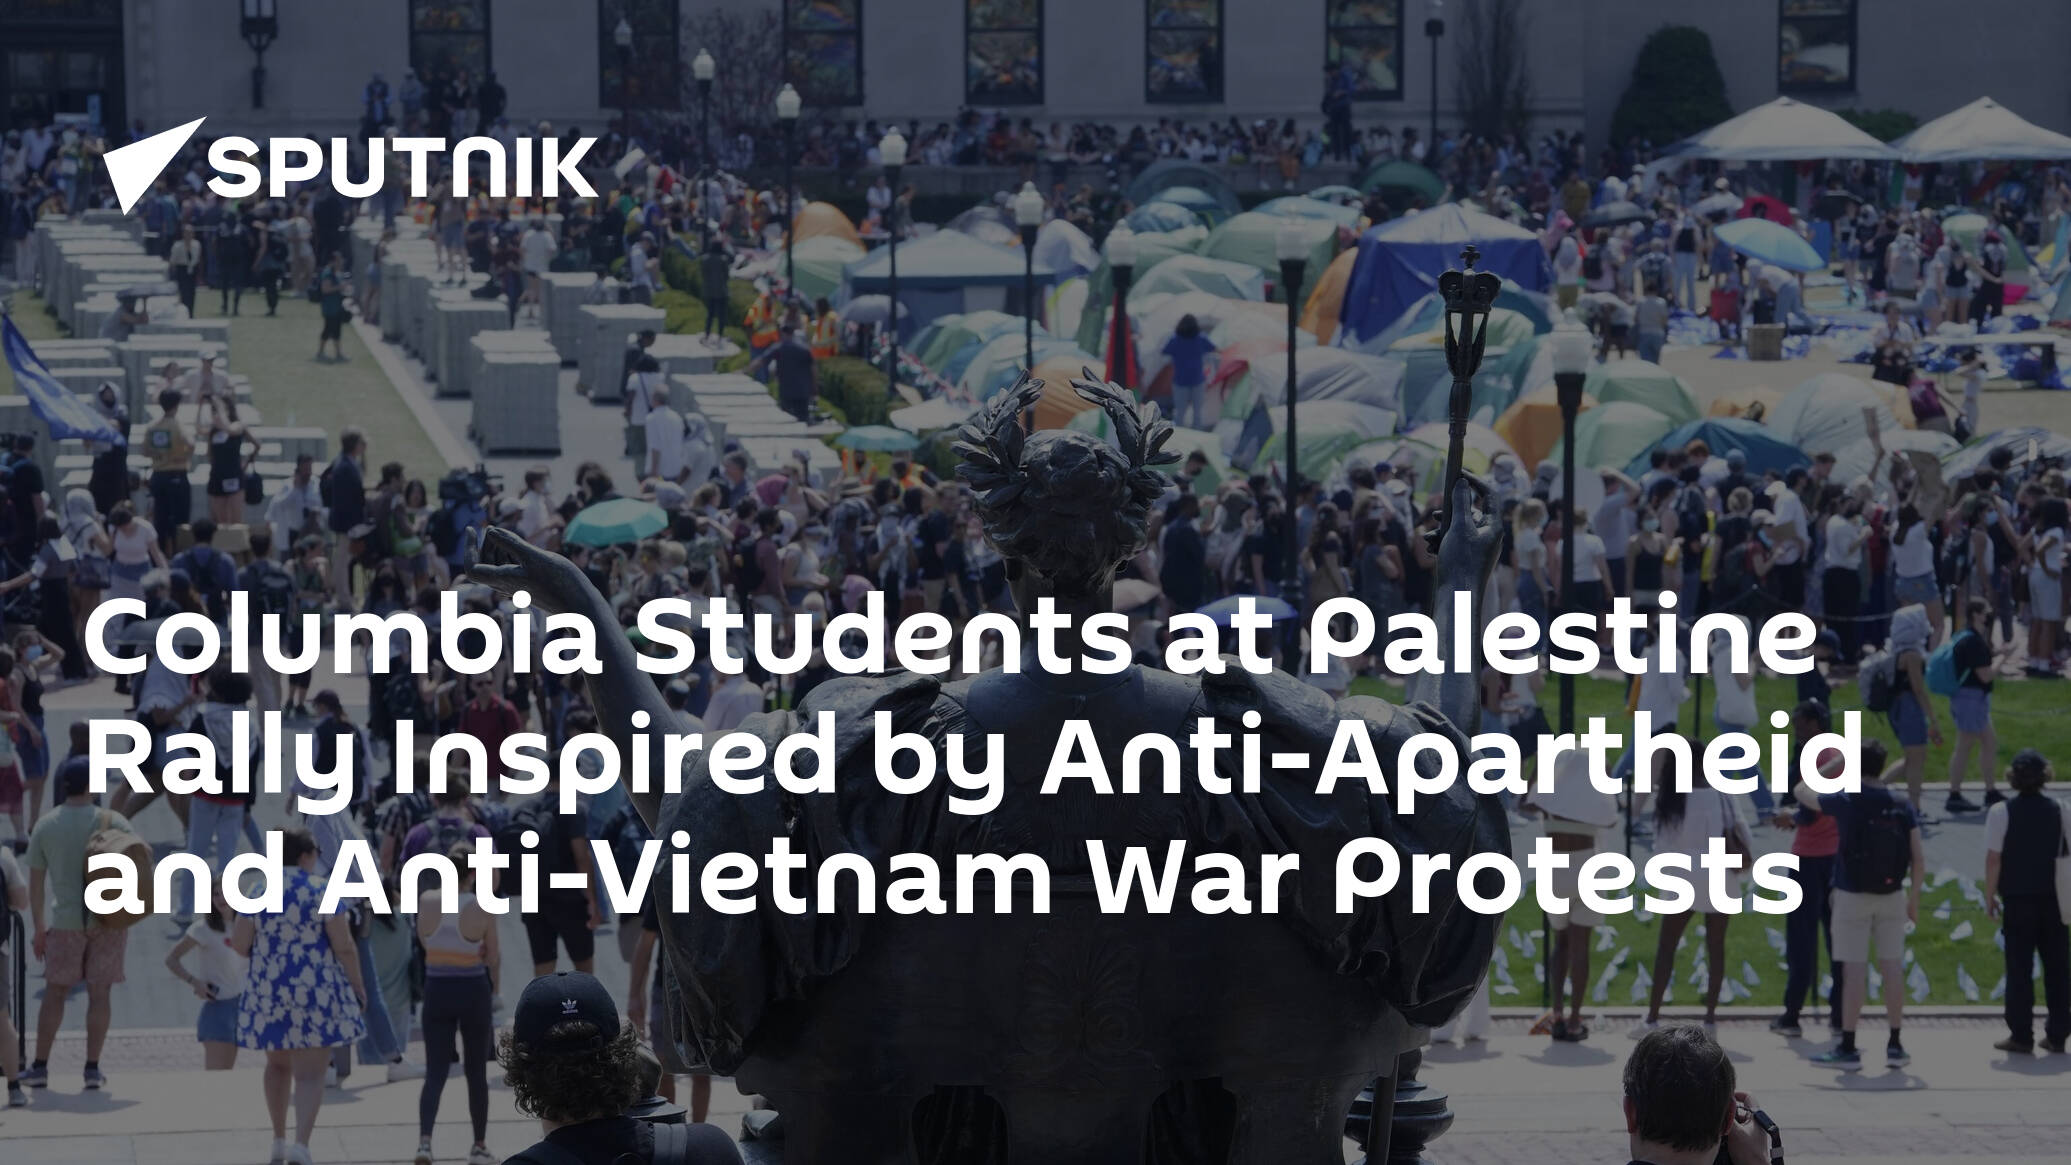 Columbia Students at Palestine Rally Inspired by Anti-Apartheid and Anti-Vietnam War Protests